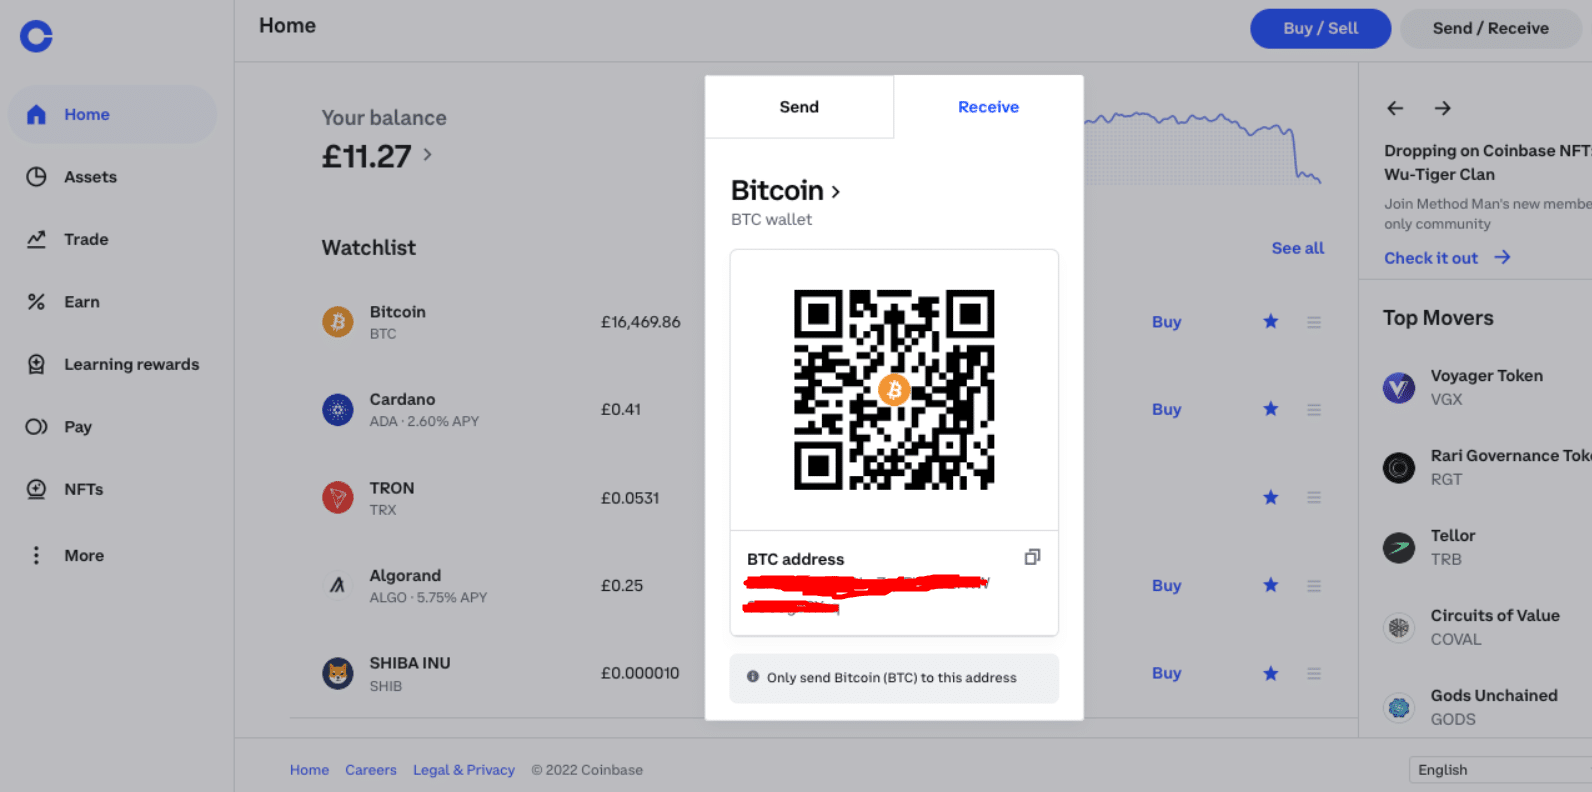 Copy the Coinbase wallet address